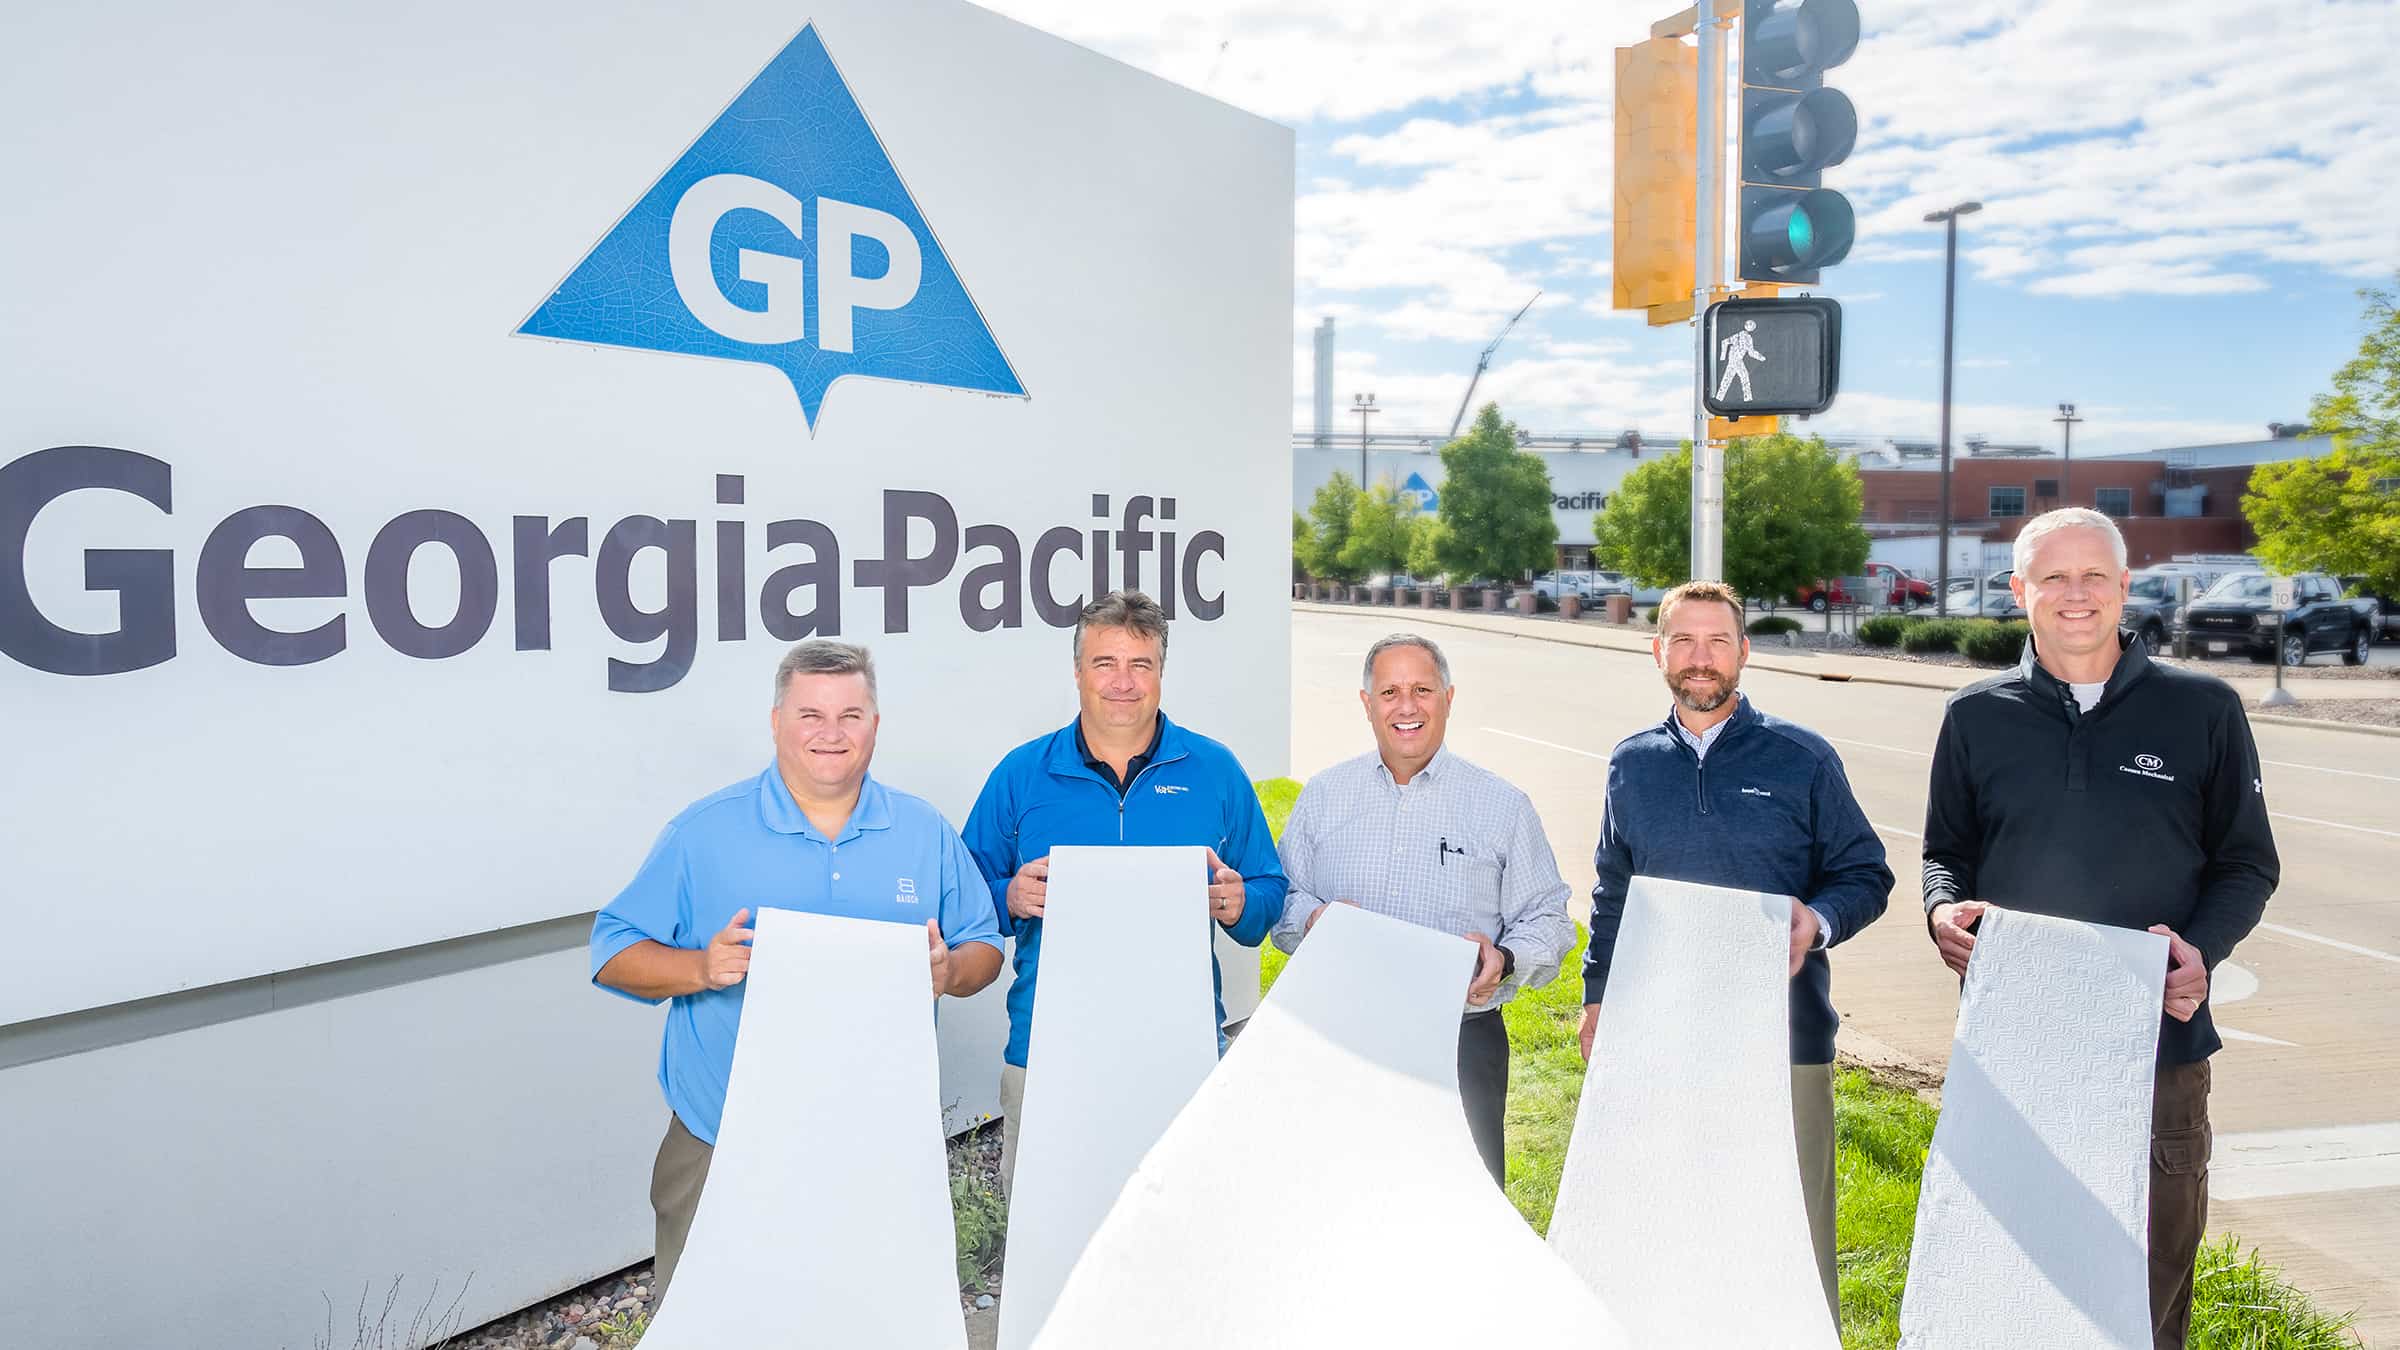 Georgia-Pacific Exterior Sign with Team Leaders Showcasing Converting Programs Product